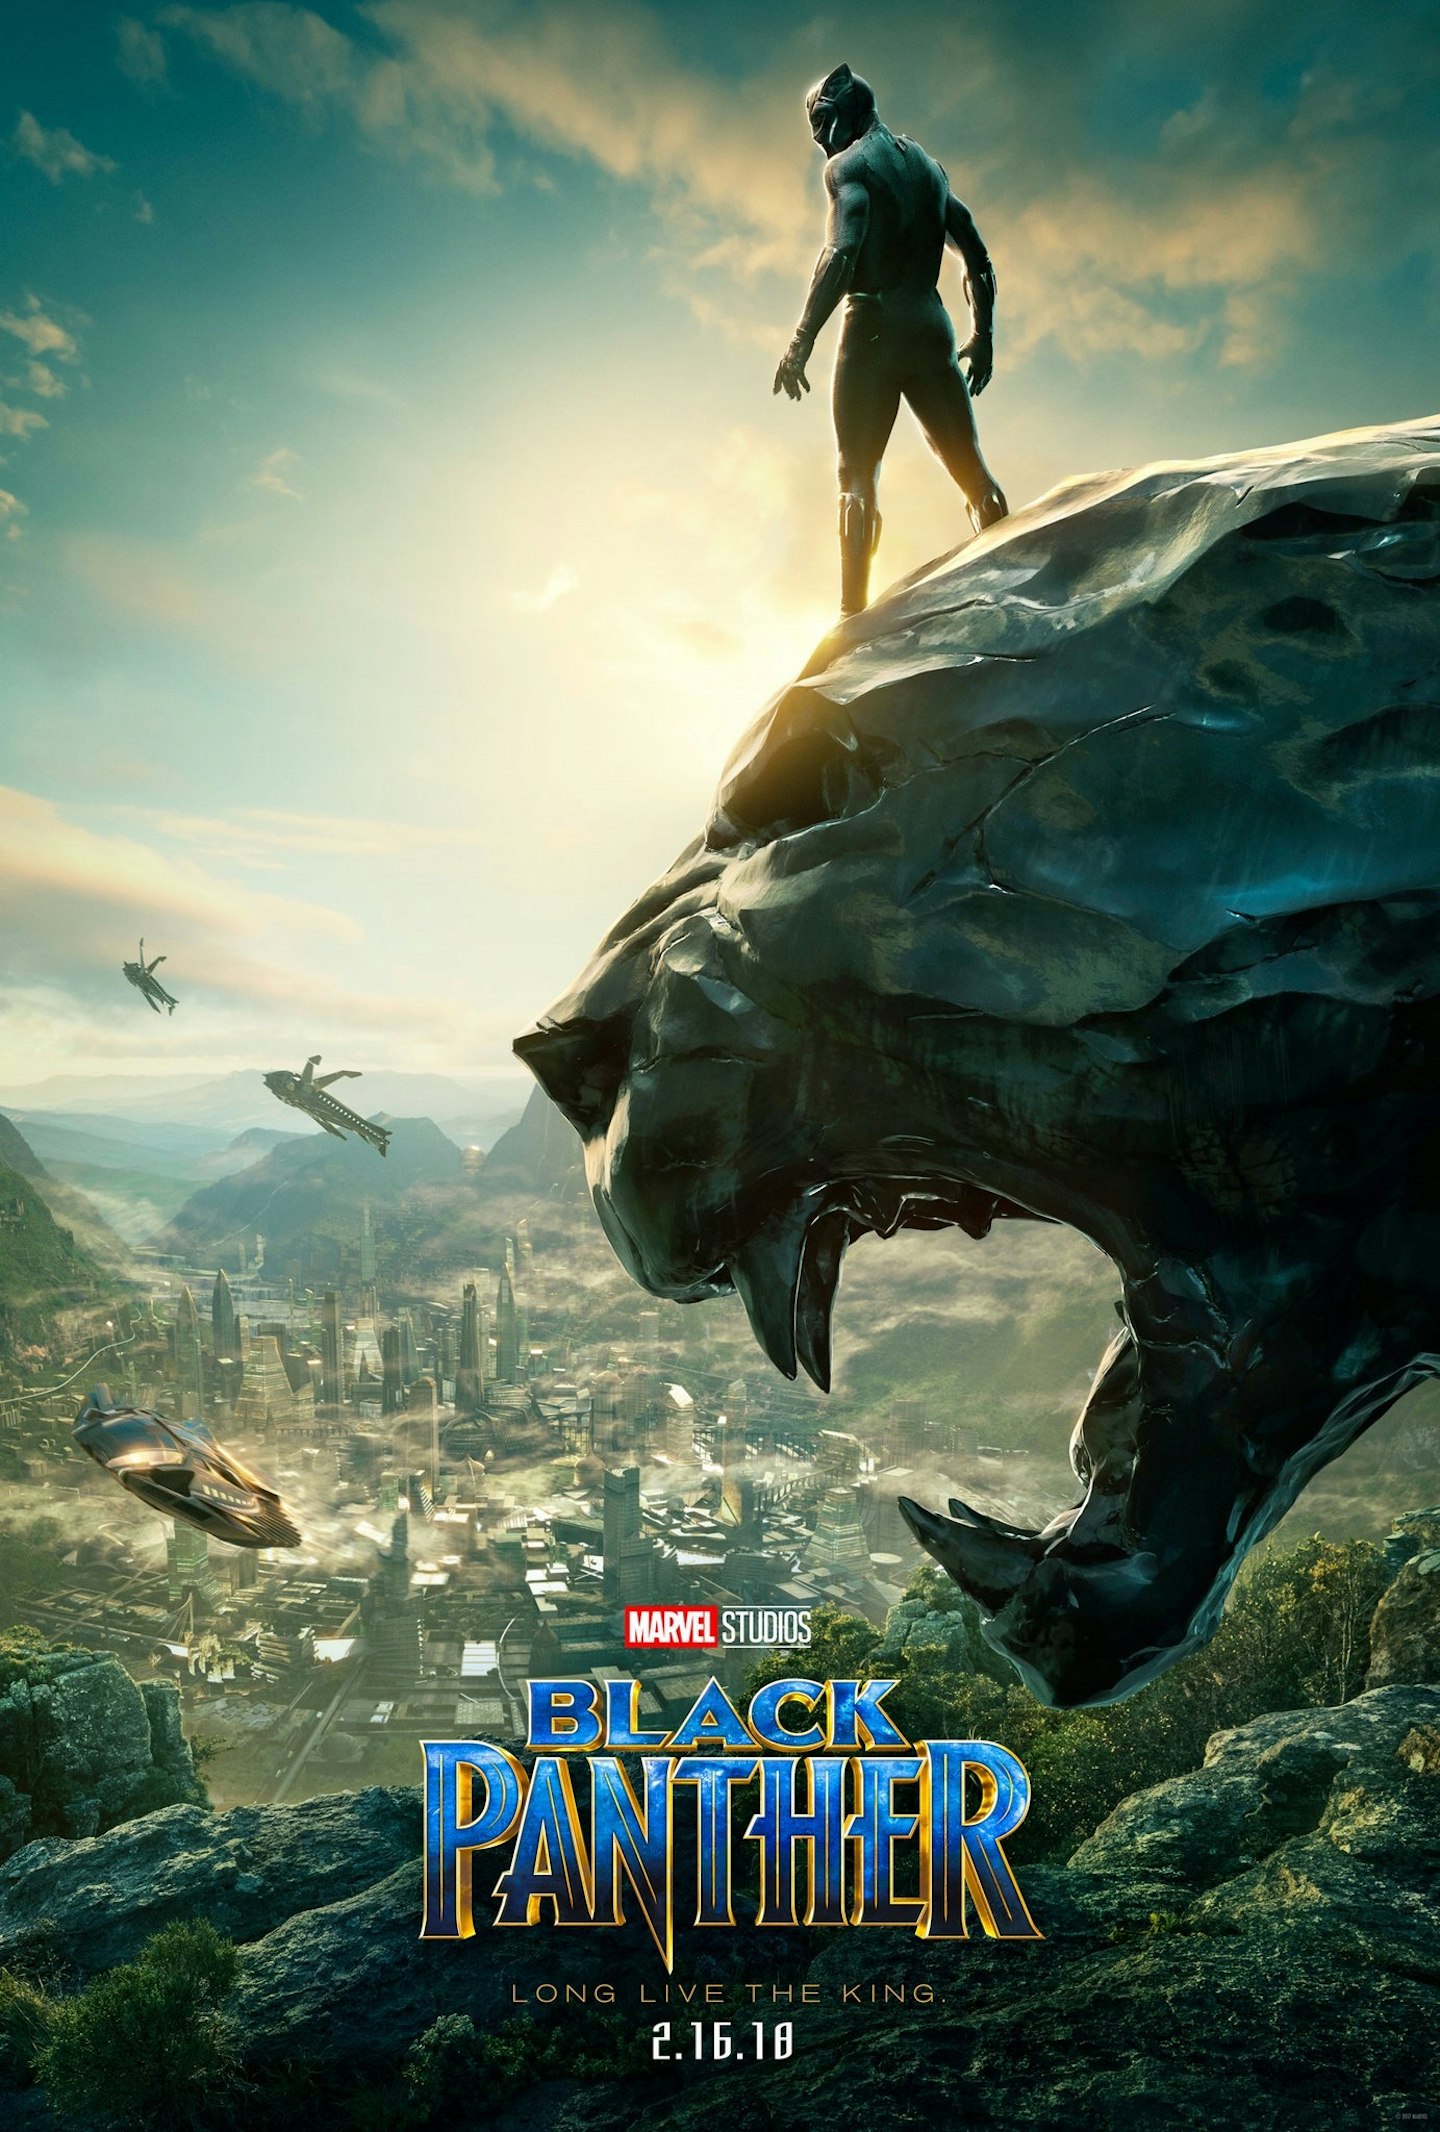 Black Panther Comic-Con poster